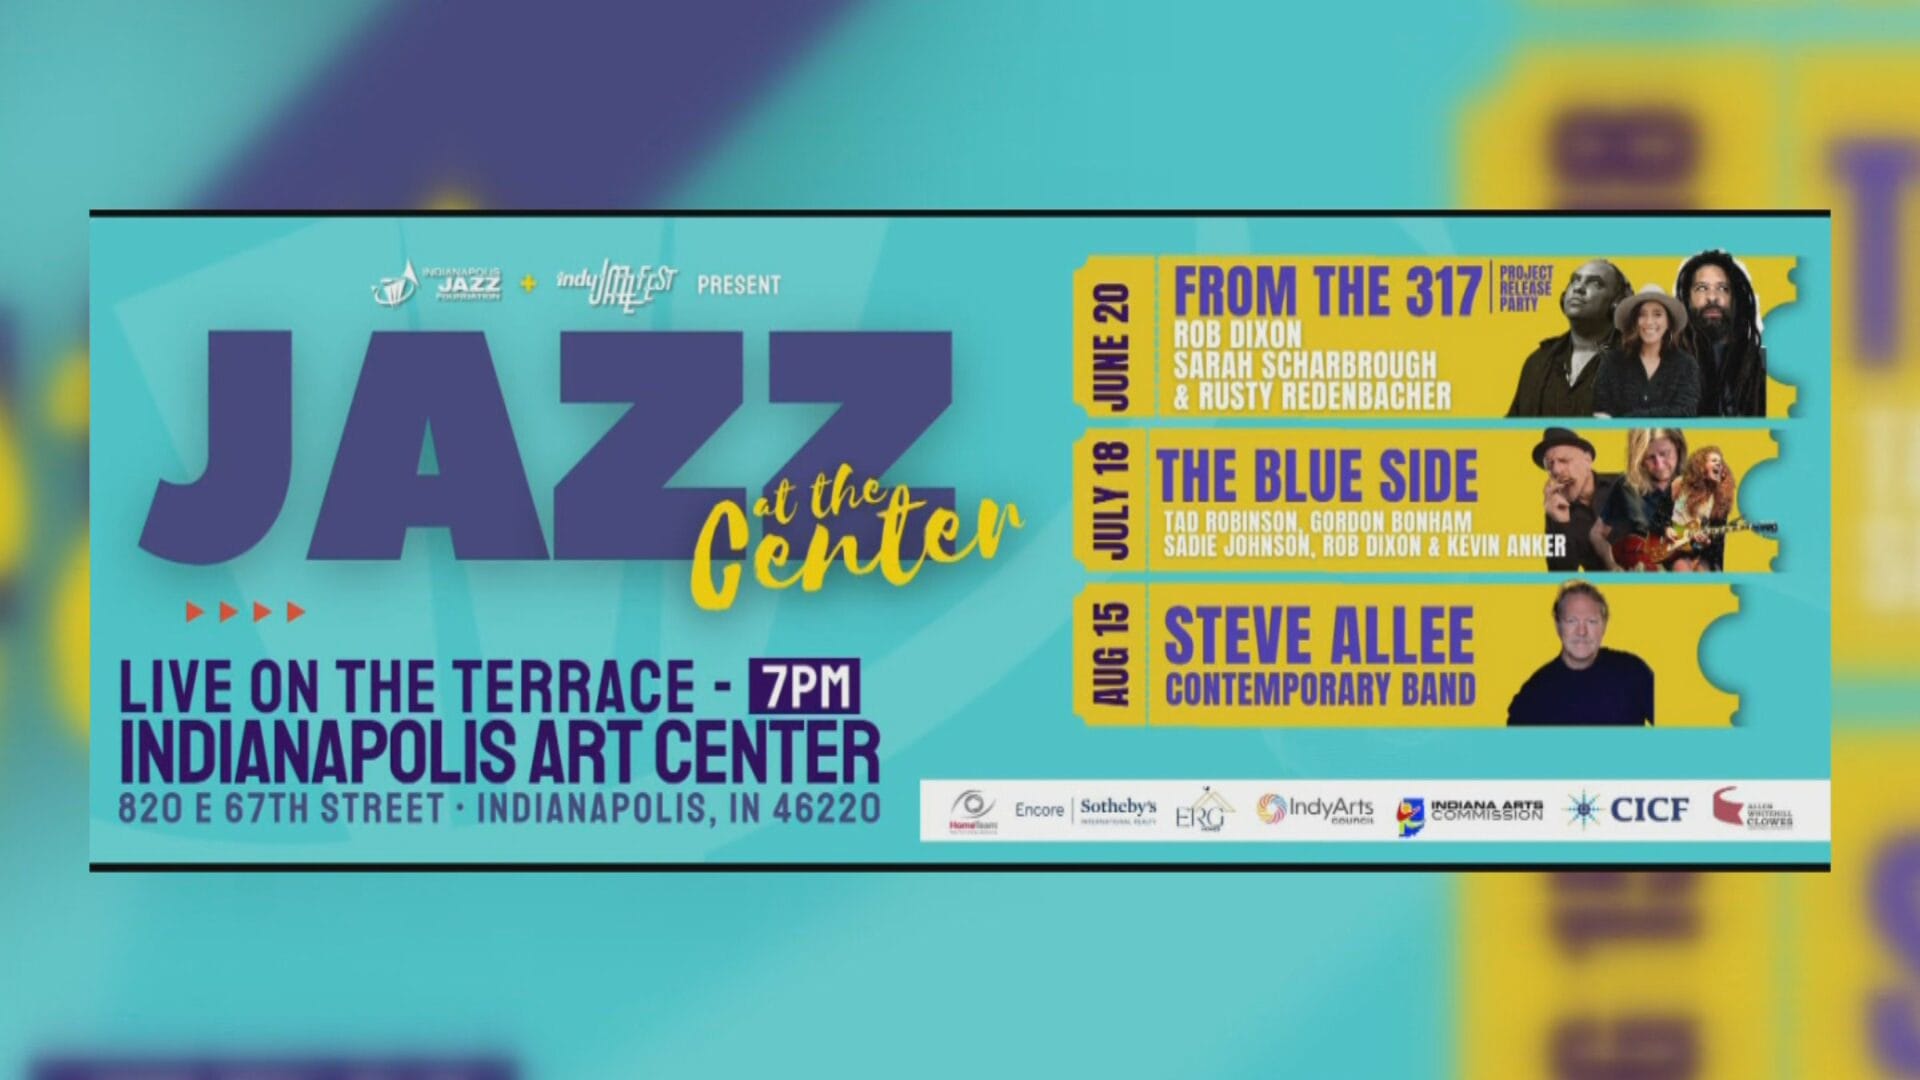 Indianapolis Art Center hosts 4th annual Summer Jazz Concert Series